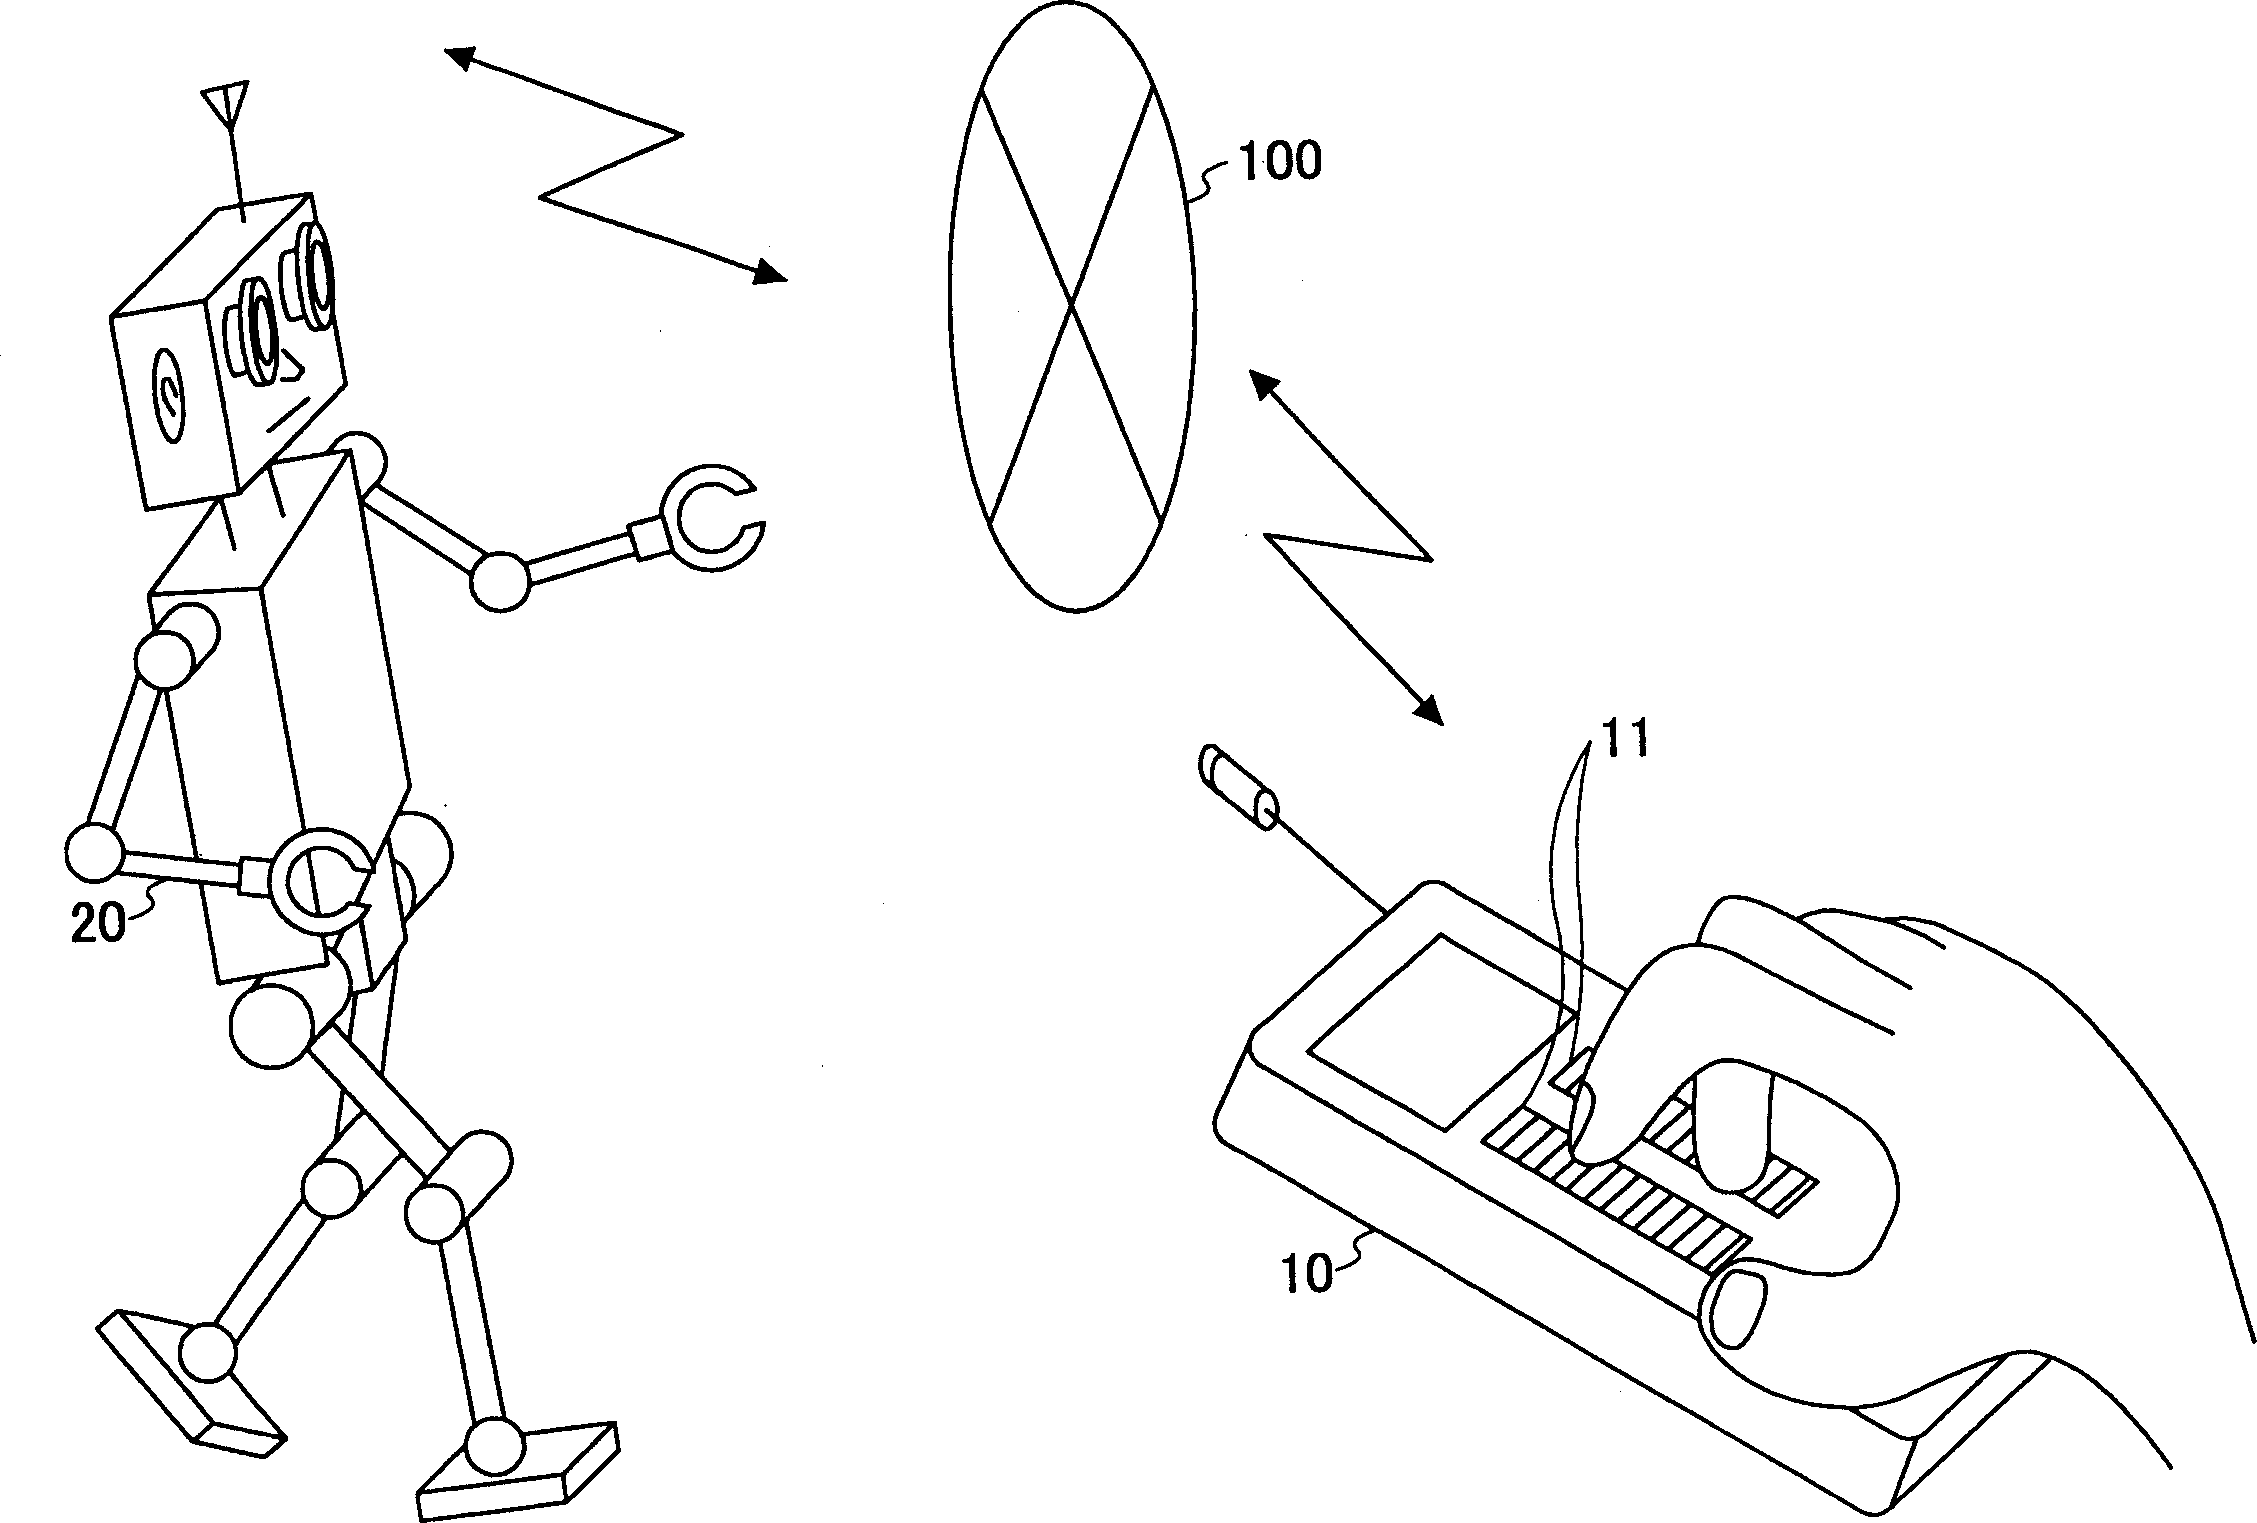 Walking robot remote-control system, apparatus and method